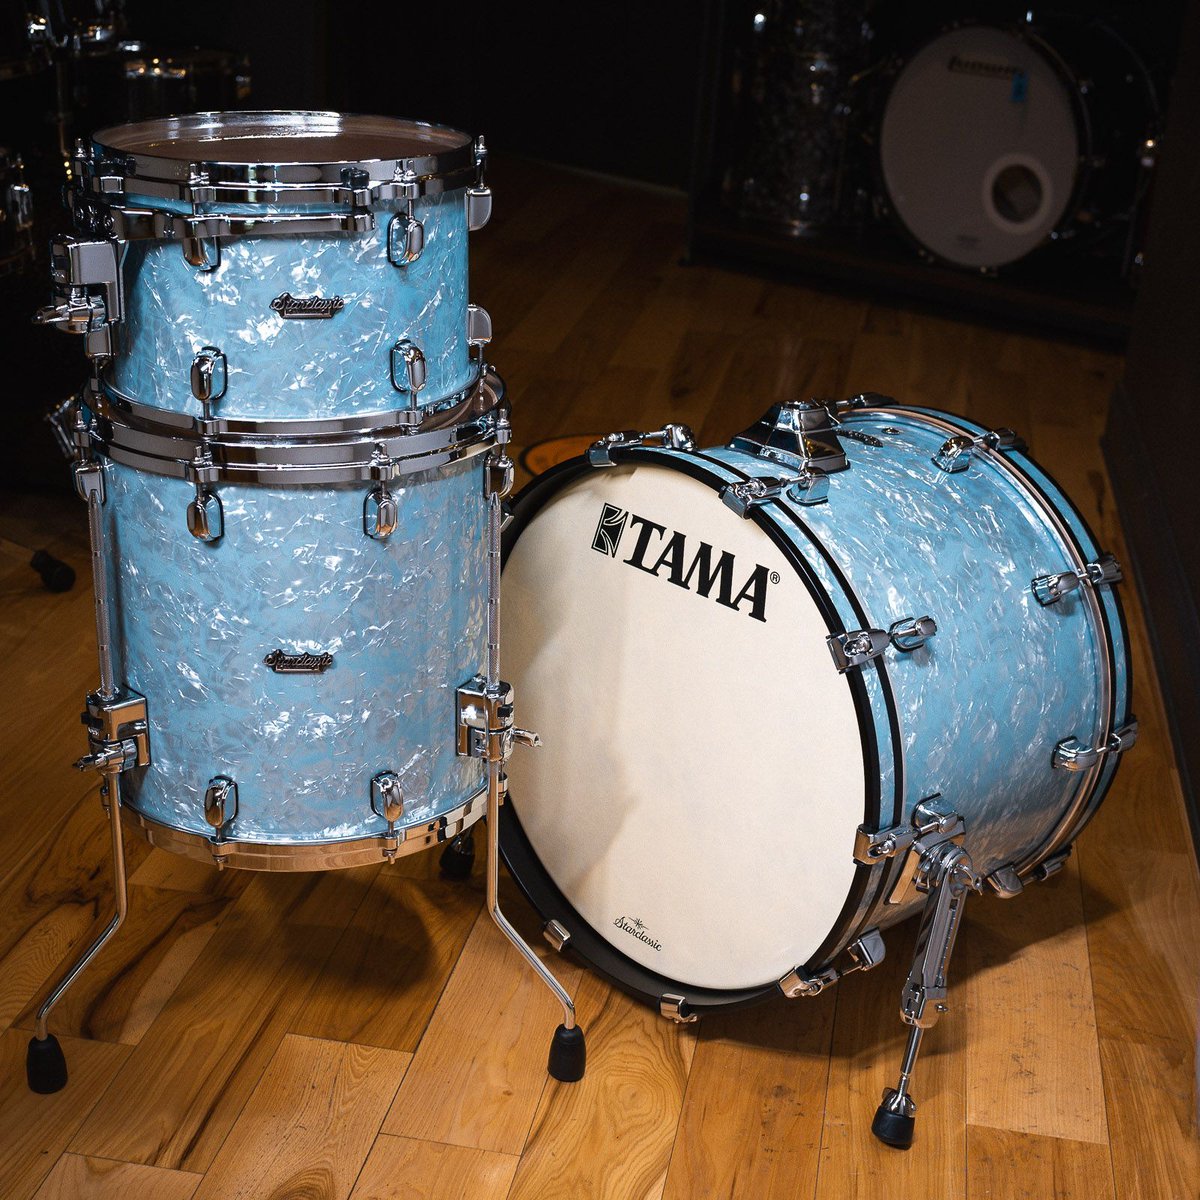 This refreshing @TAMAofficial Starclassic Maple 12/14/20 kit in Ice Blue Pearl keep's things cool, real cool...bit.ly/3rq0Acs #cde #chicagodrumexchange #chicagomusicexchange #drumshop #drumlove #drumstagram #drumsdaily #gearwire #gearybusey #Tama